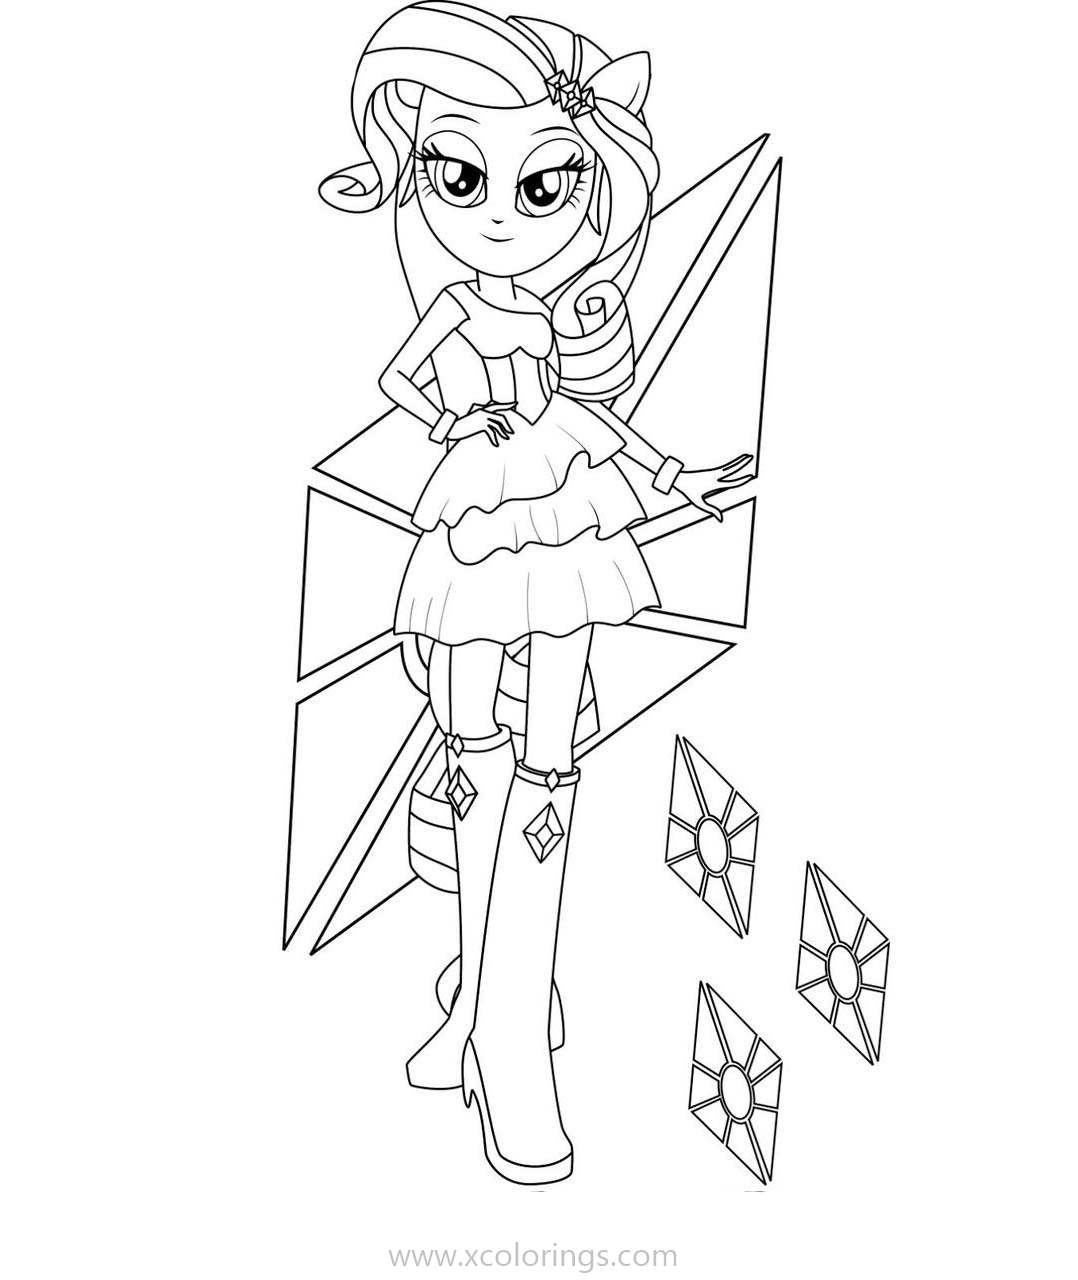 Free MLP Pinkie Pie Equestria Girl Coloring Pages printable